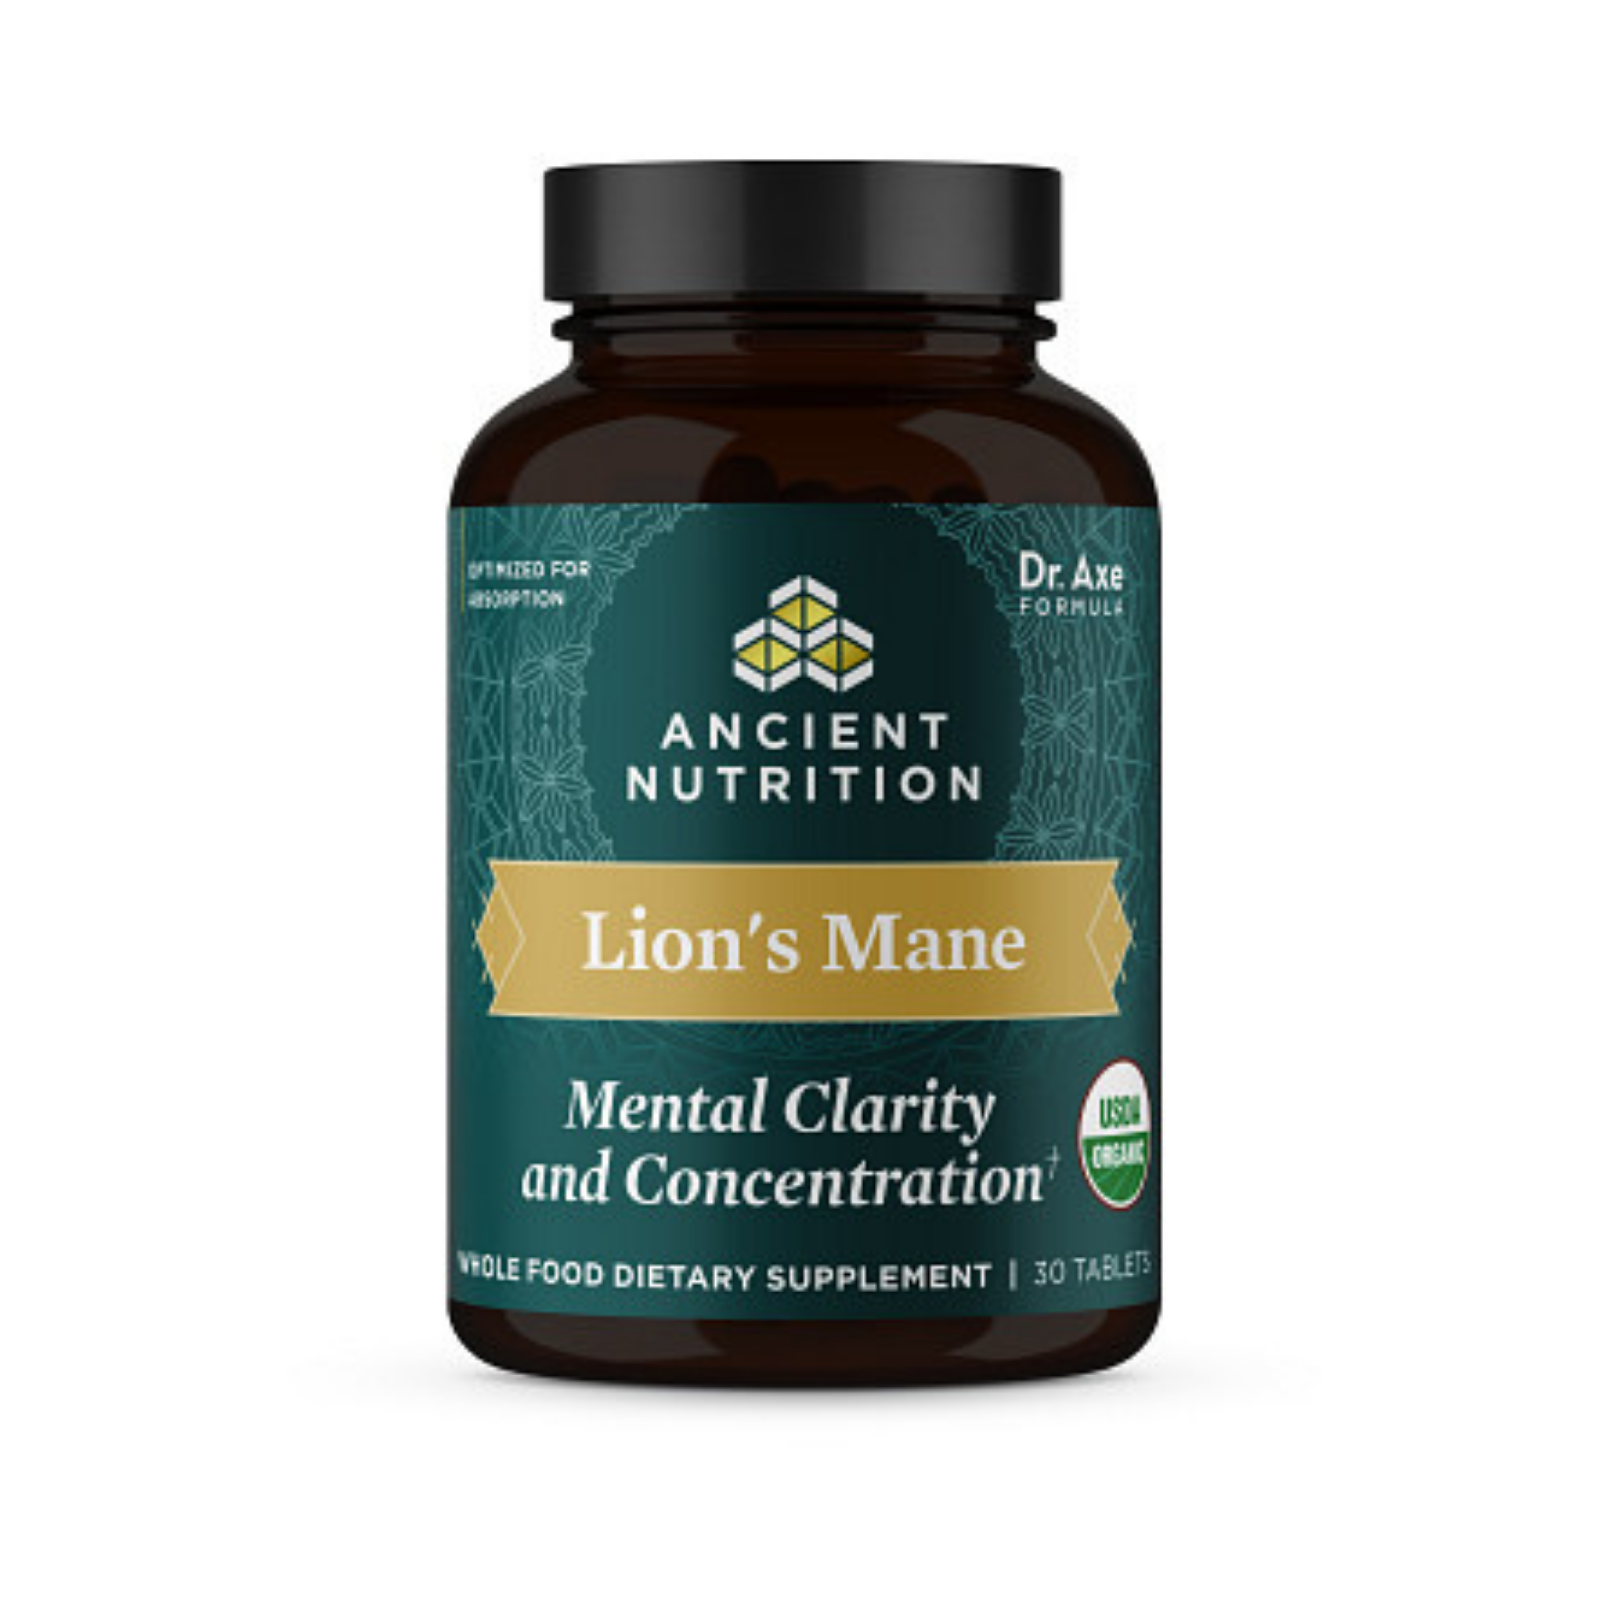 Lion’s Mane Mental Clarity and Concentration Tablets